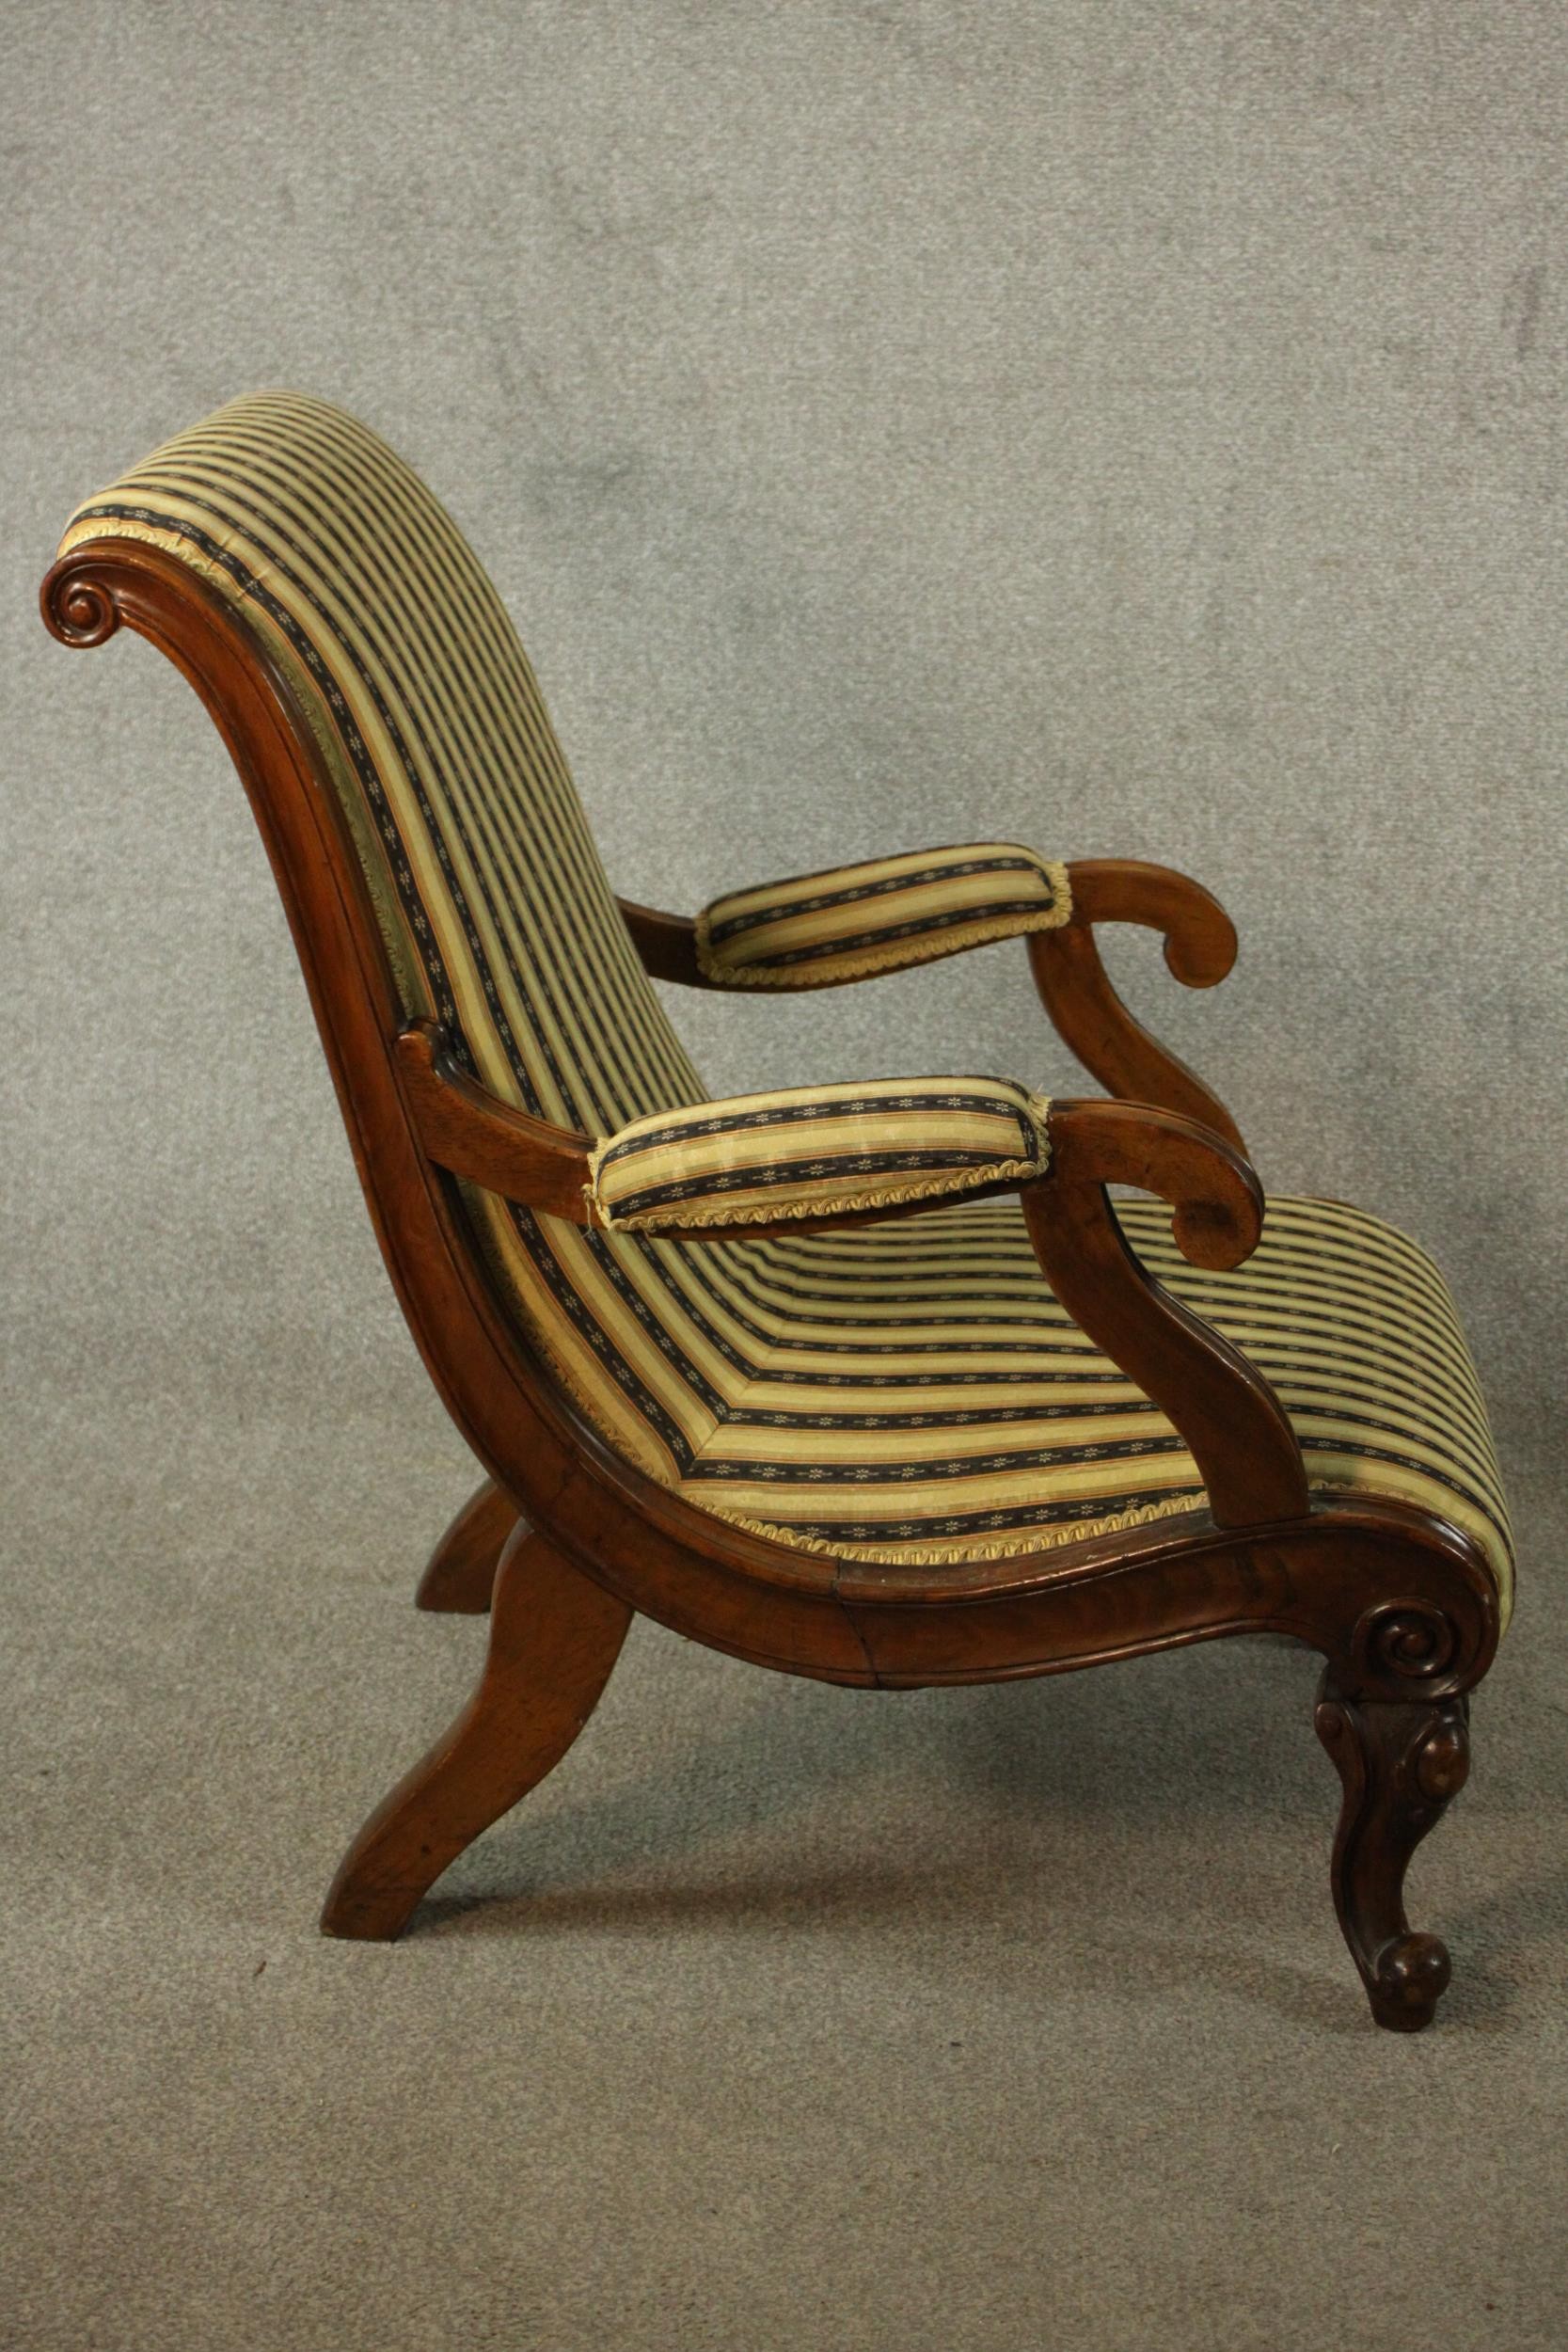 Two similar Victorian walnut slipper chairs, with striped upholstery, one with open arms, on - Image 5 of 21